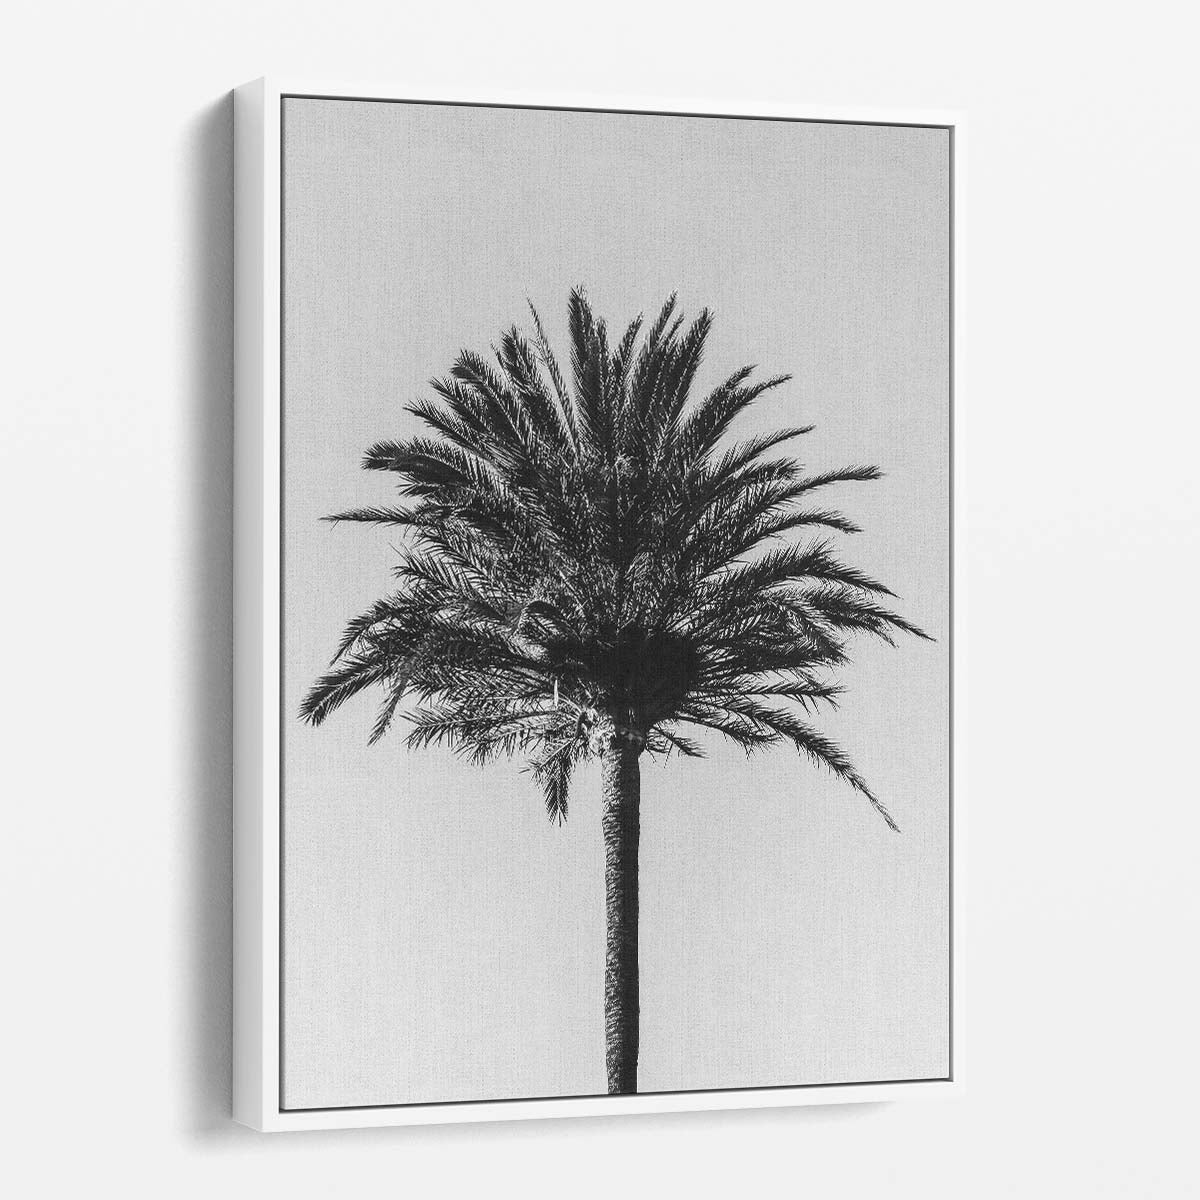 Minimalistic Monochrome Palm Tree Landscape Photography Art by Luxuriance Designs, made in USA